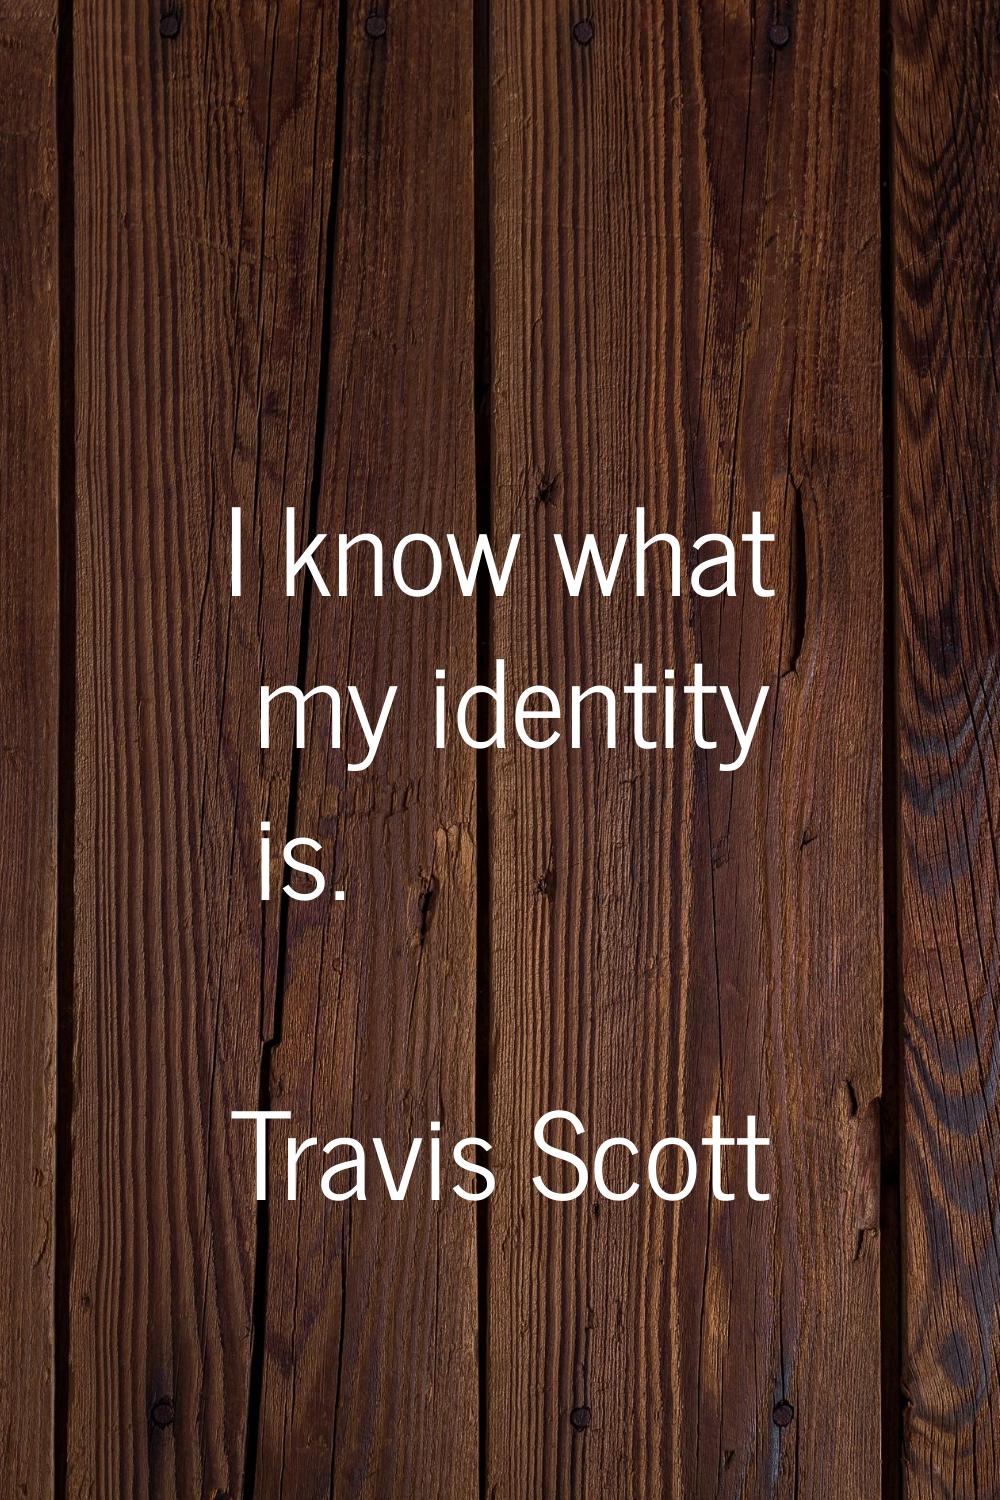 I know what my identity is.